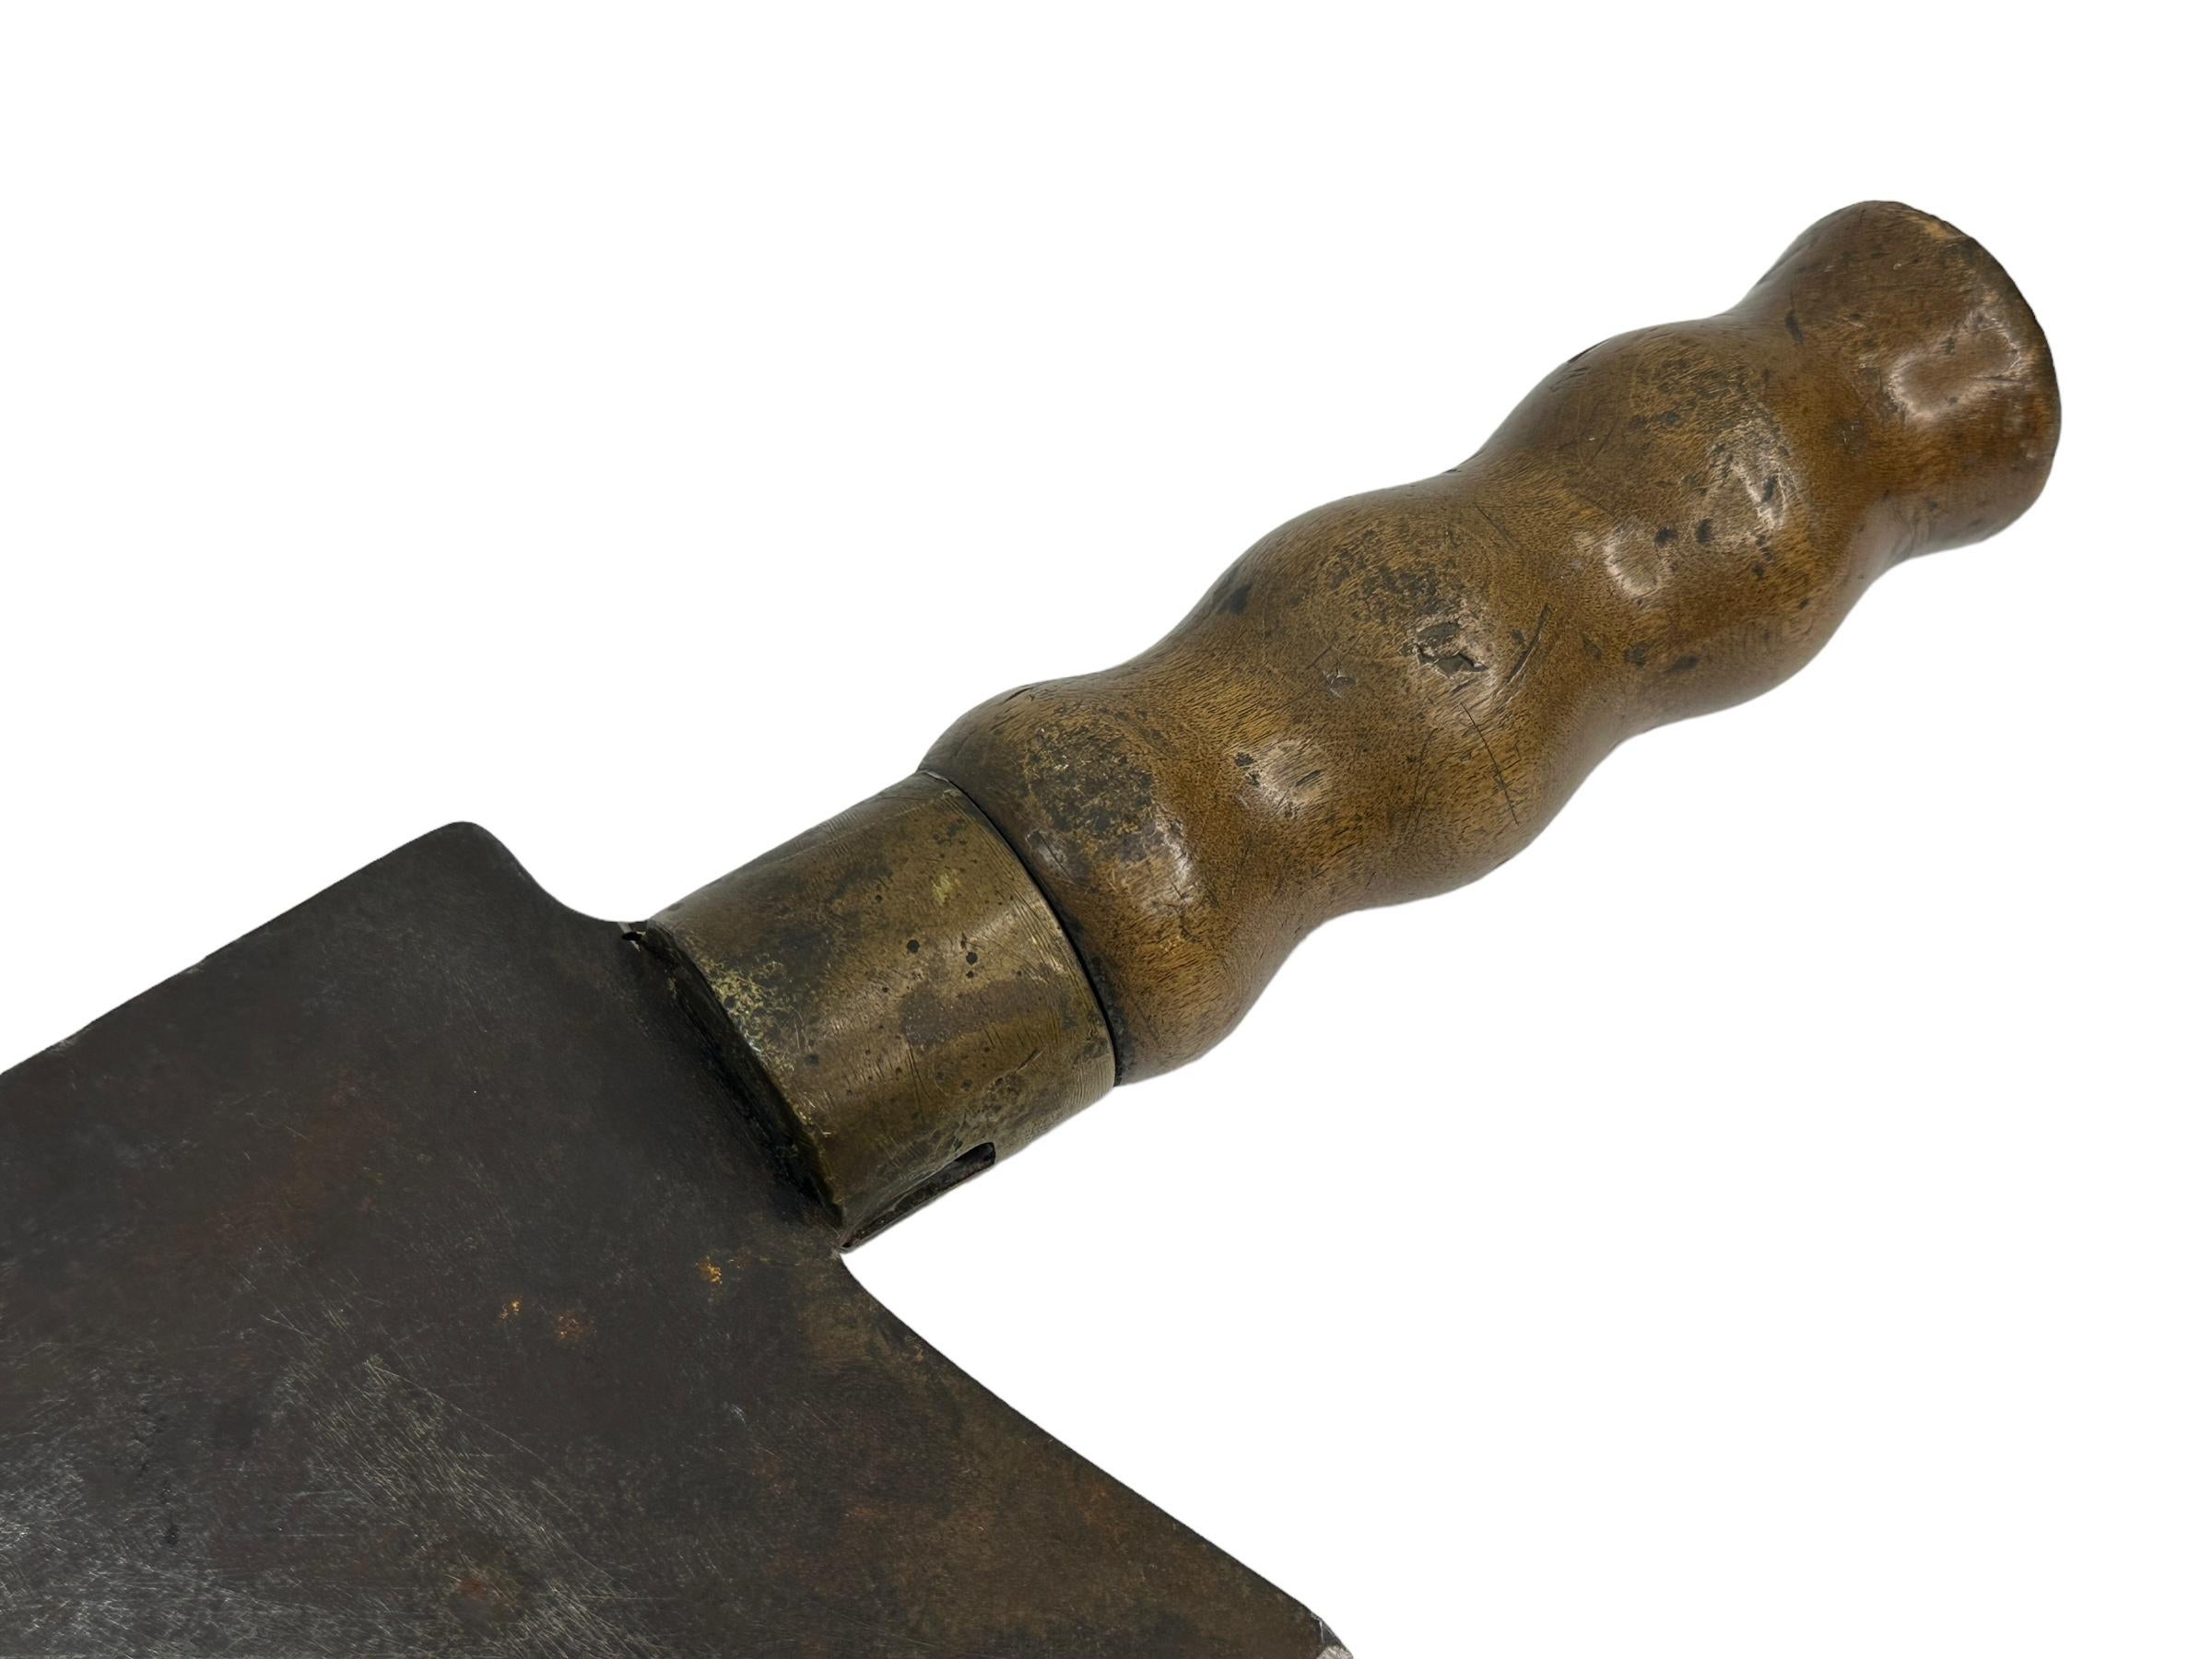 Hand-Crafted Highly Decorative 19th Century European German Cleaver, Kitchen Butcher Utensil For Sale